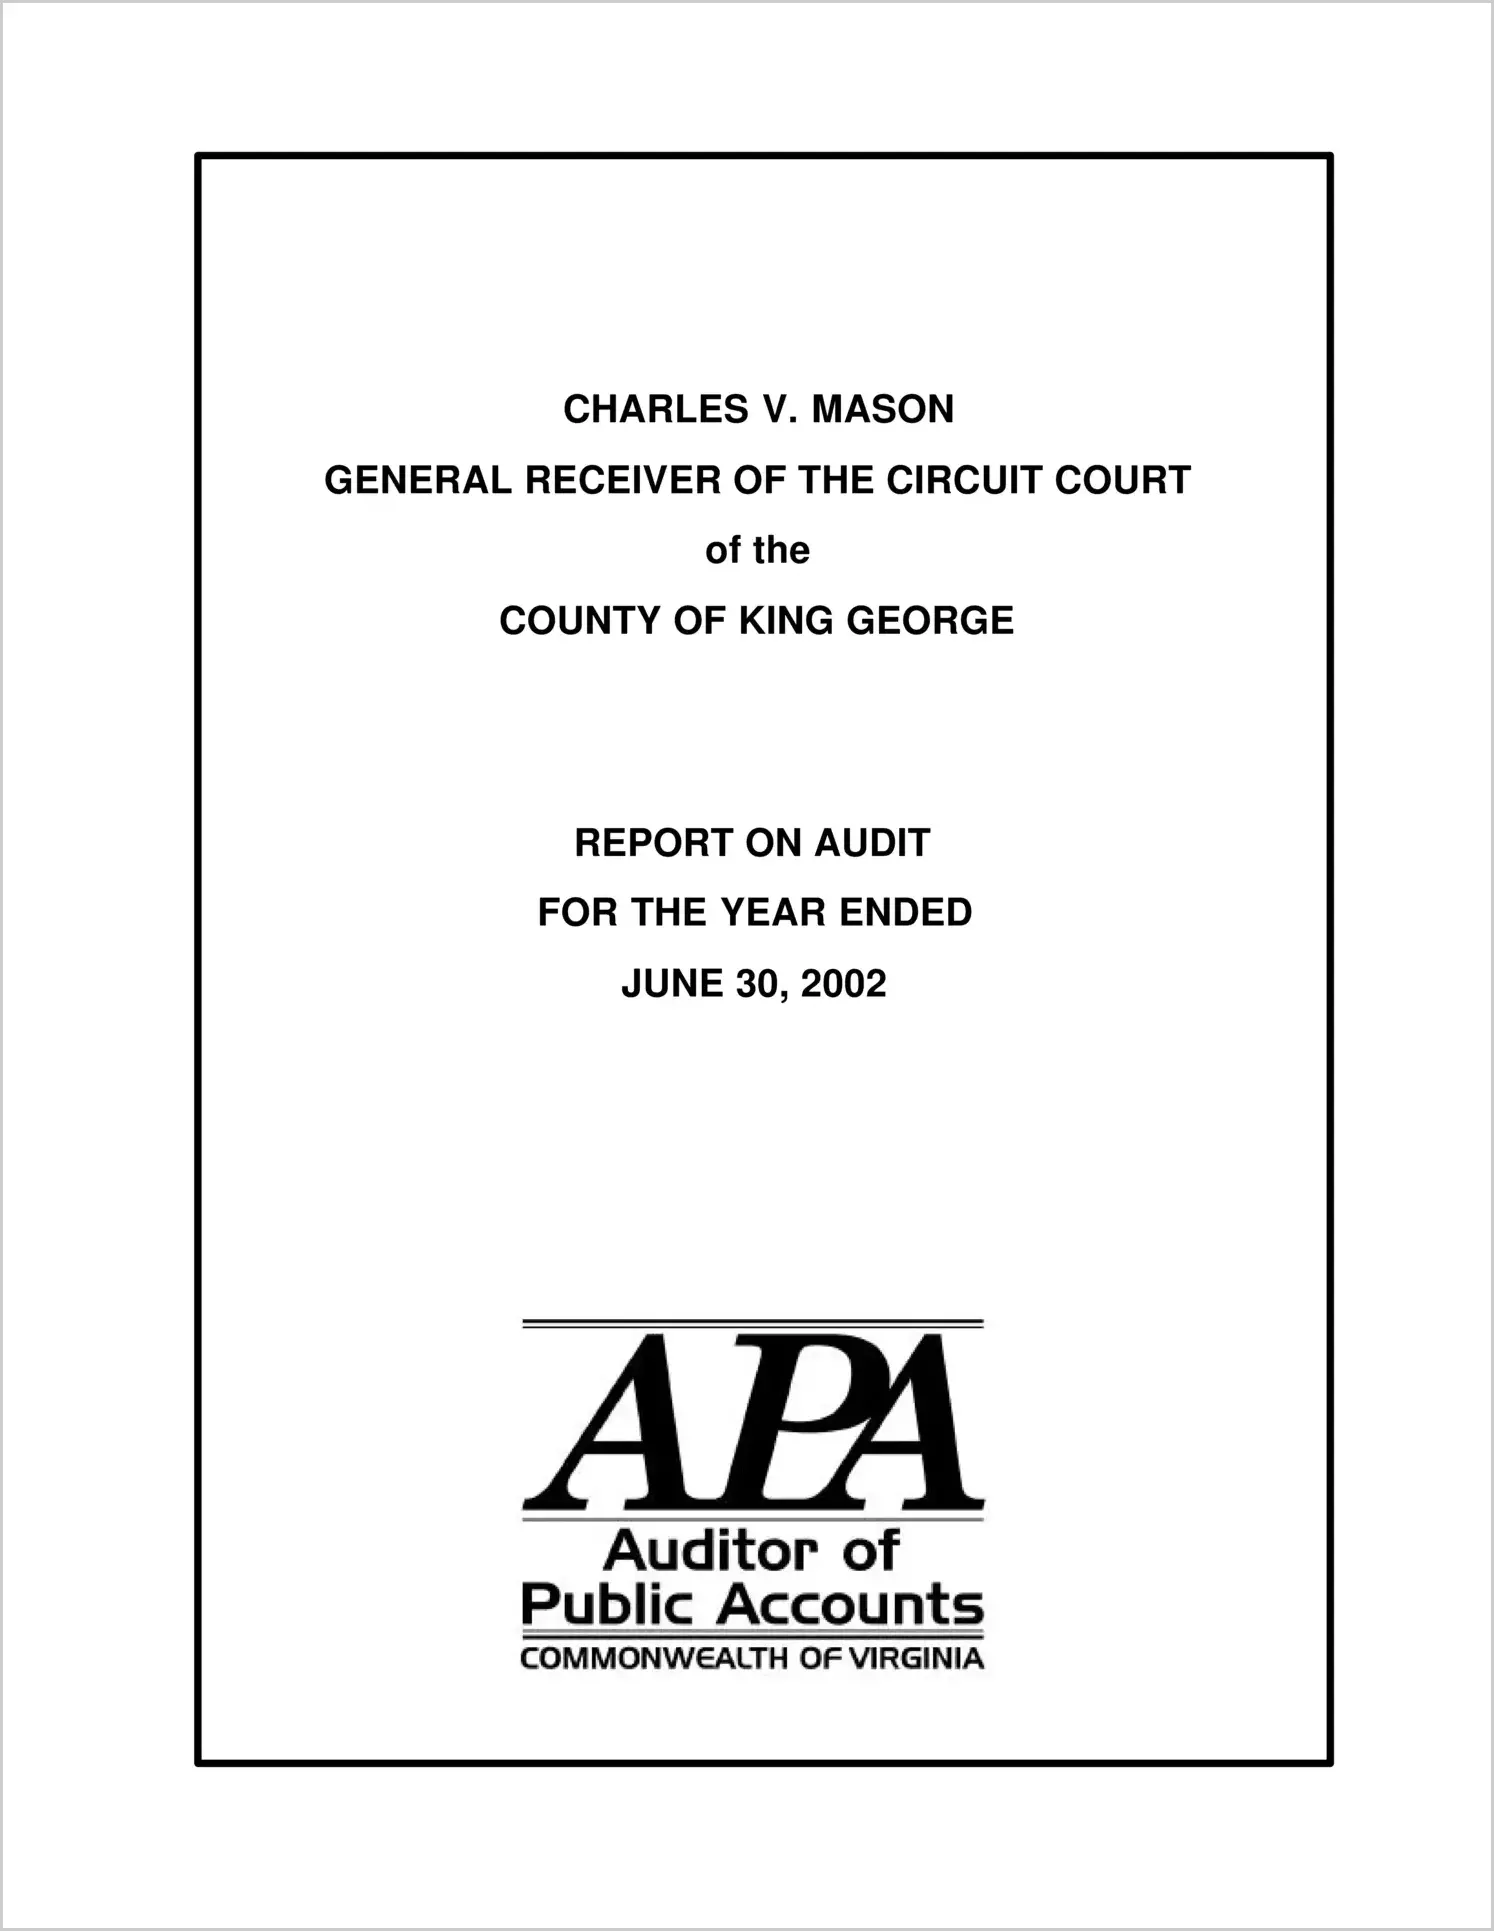 General Receiver of the Circuit Court of the County of King George for the year ended June 30, 2002